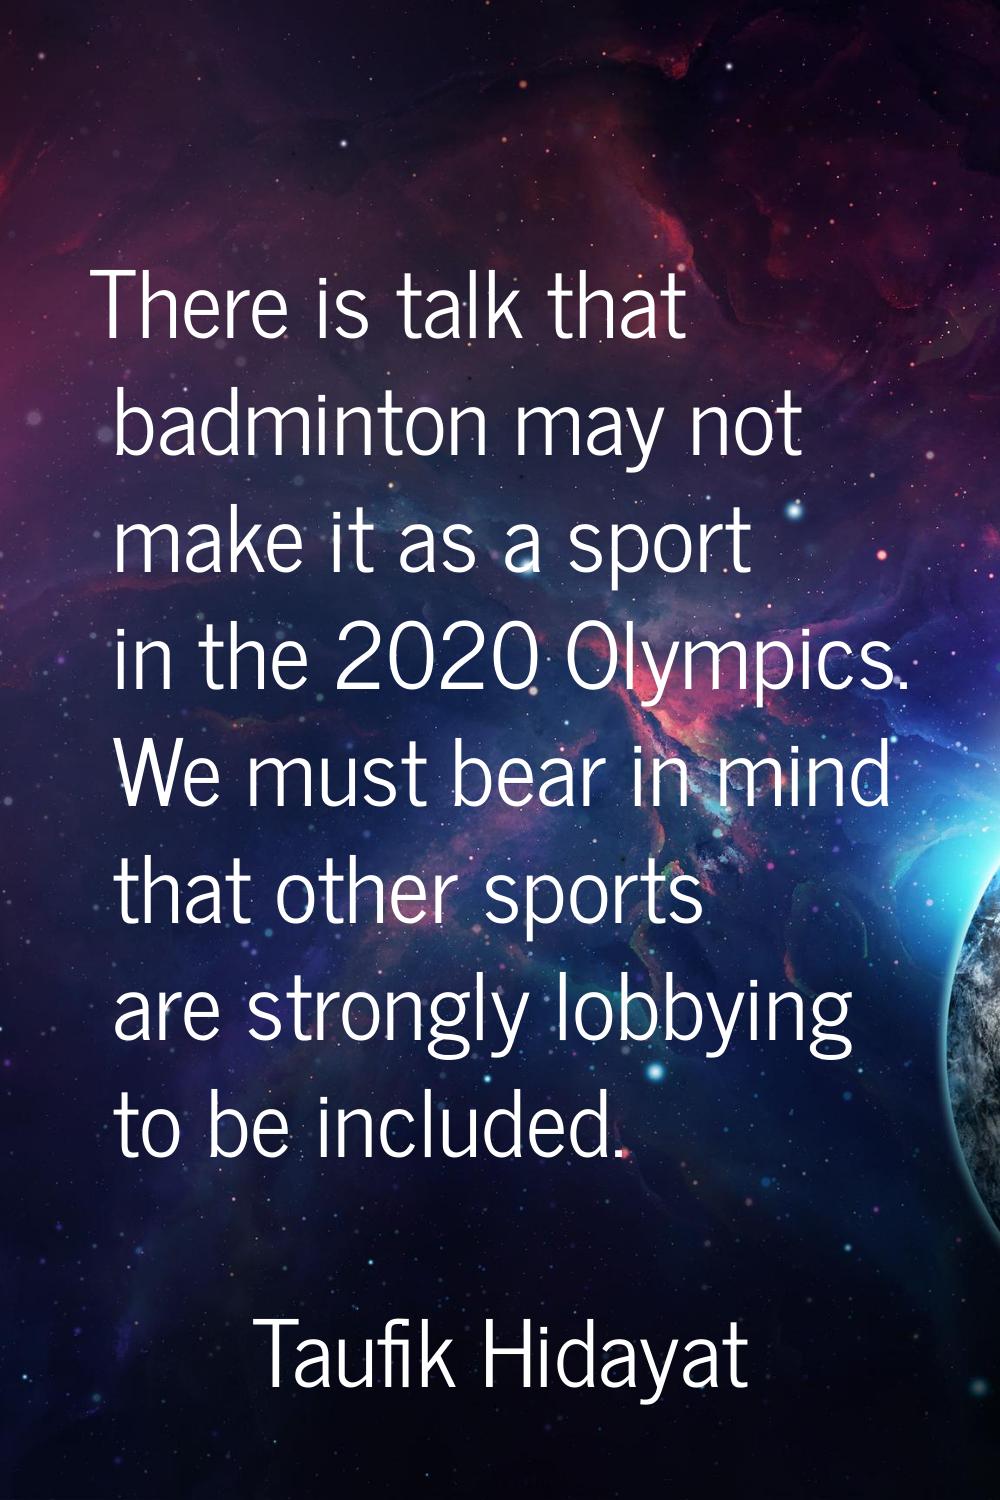 There is talk that badminton may not make it as a sport in the 2020 Olympics. We must bear in mind 